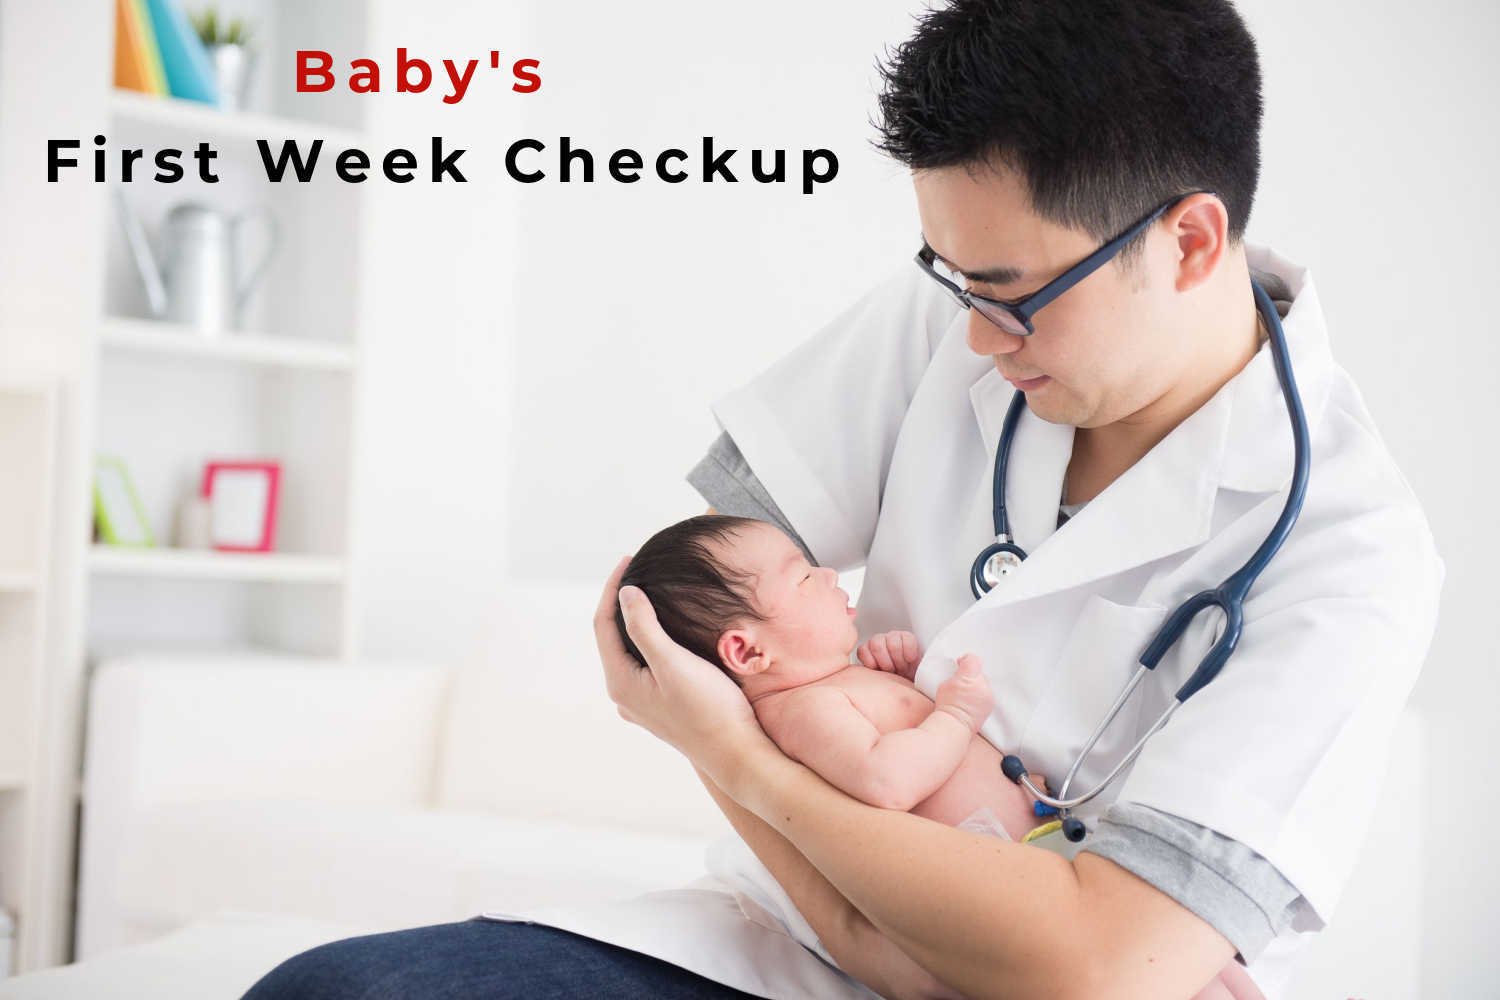 Baby’s First Week Checkup – What Can We Expect